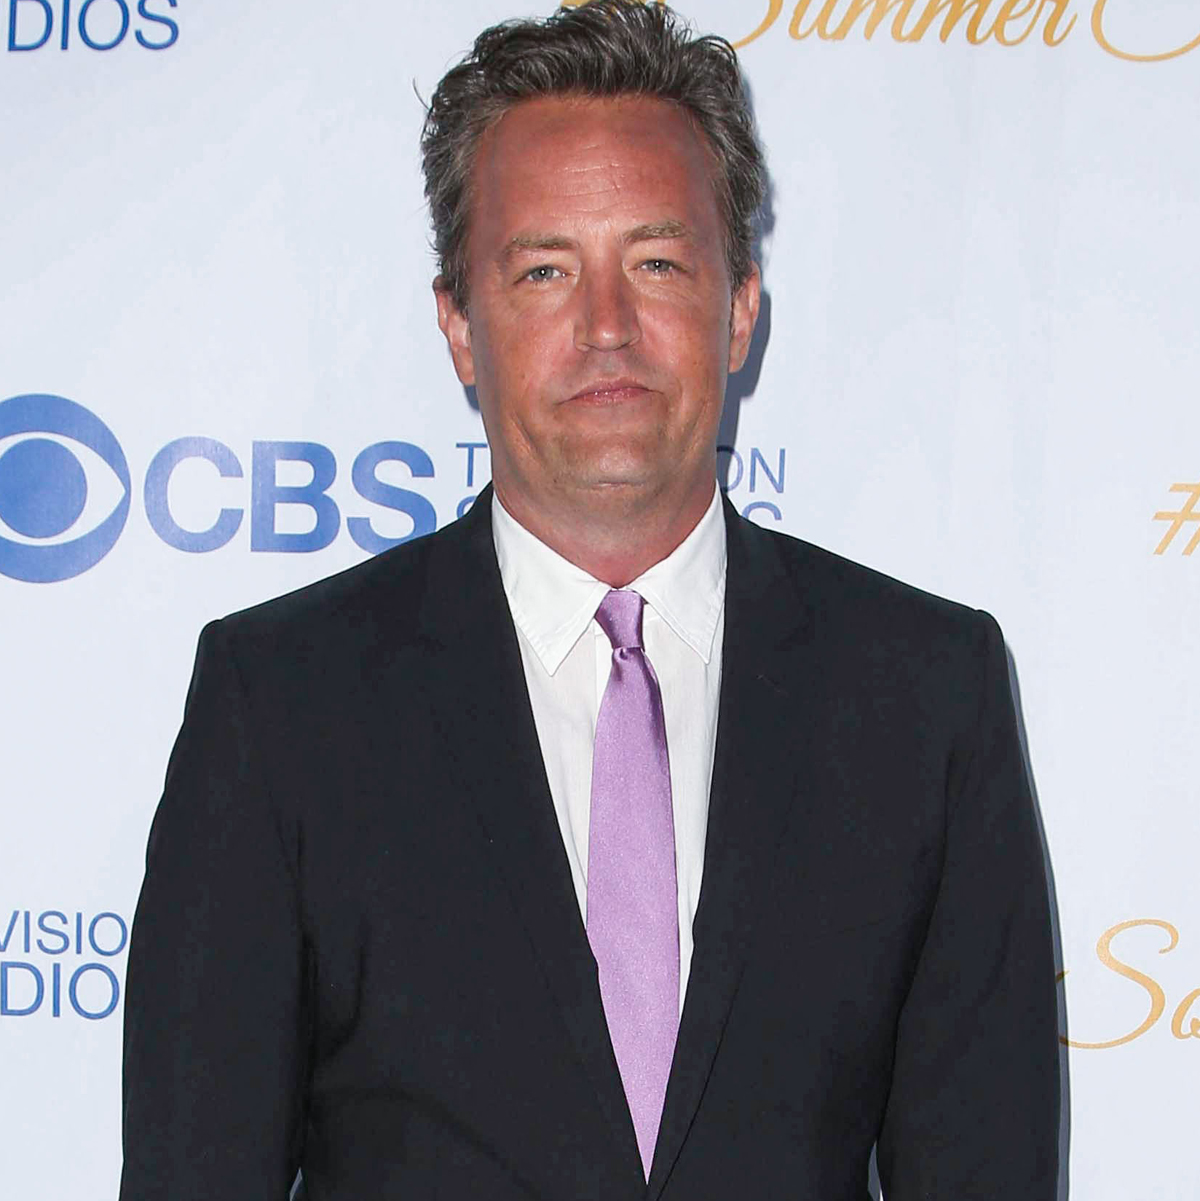 #Preliminary Tests Suggest Two Key Drugs Were NOT In Matthew Perry’s System At The Time Of His Death